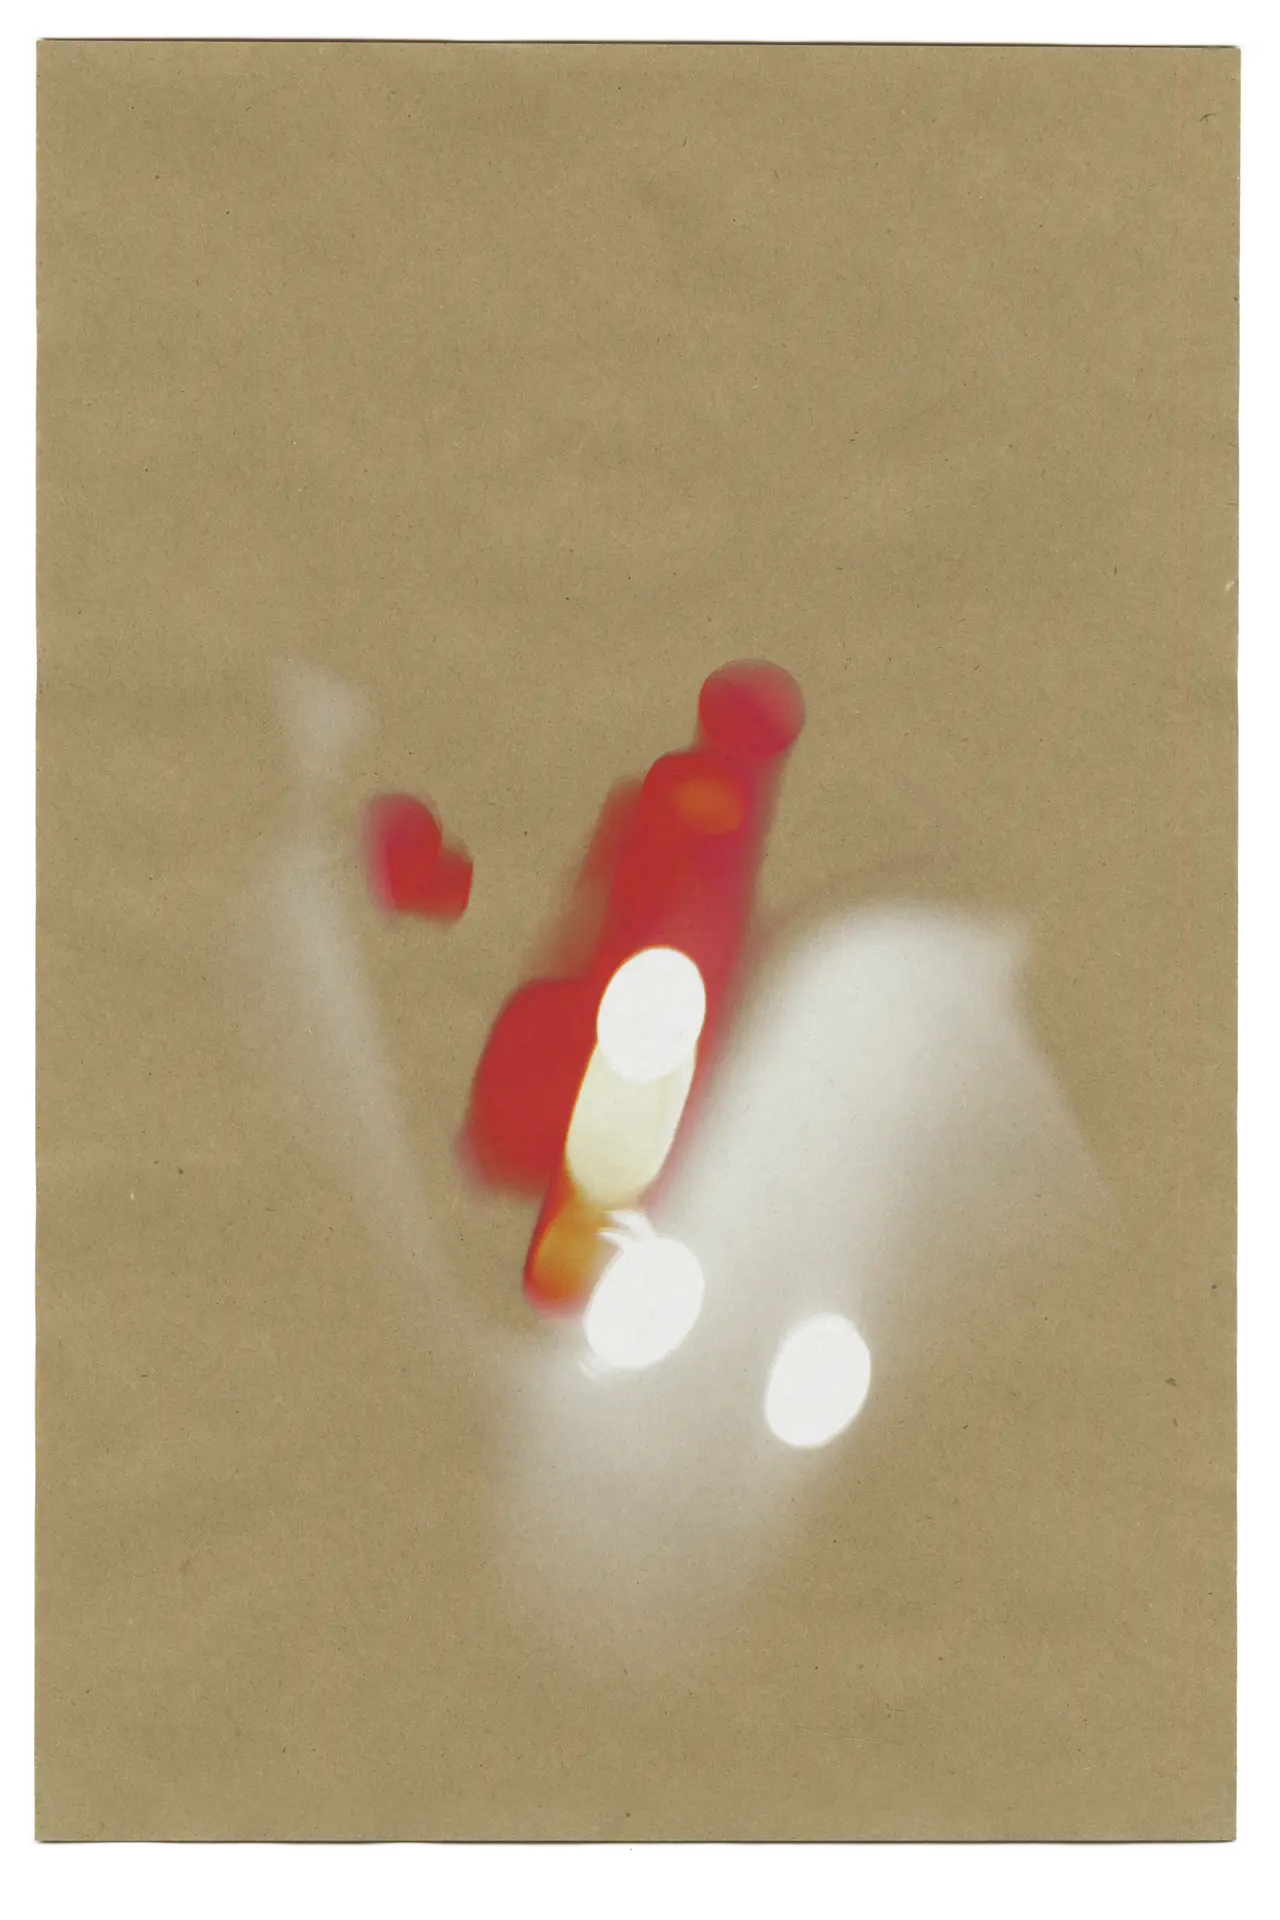 This print is of the rear brake light of a white car. On its side like this, it looks like a tulip or a bouquet of flowers, something floral while saturated and fiery.